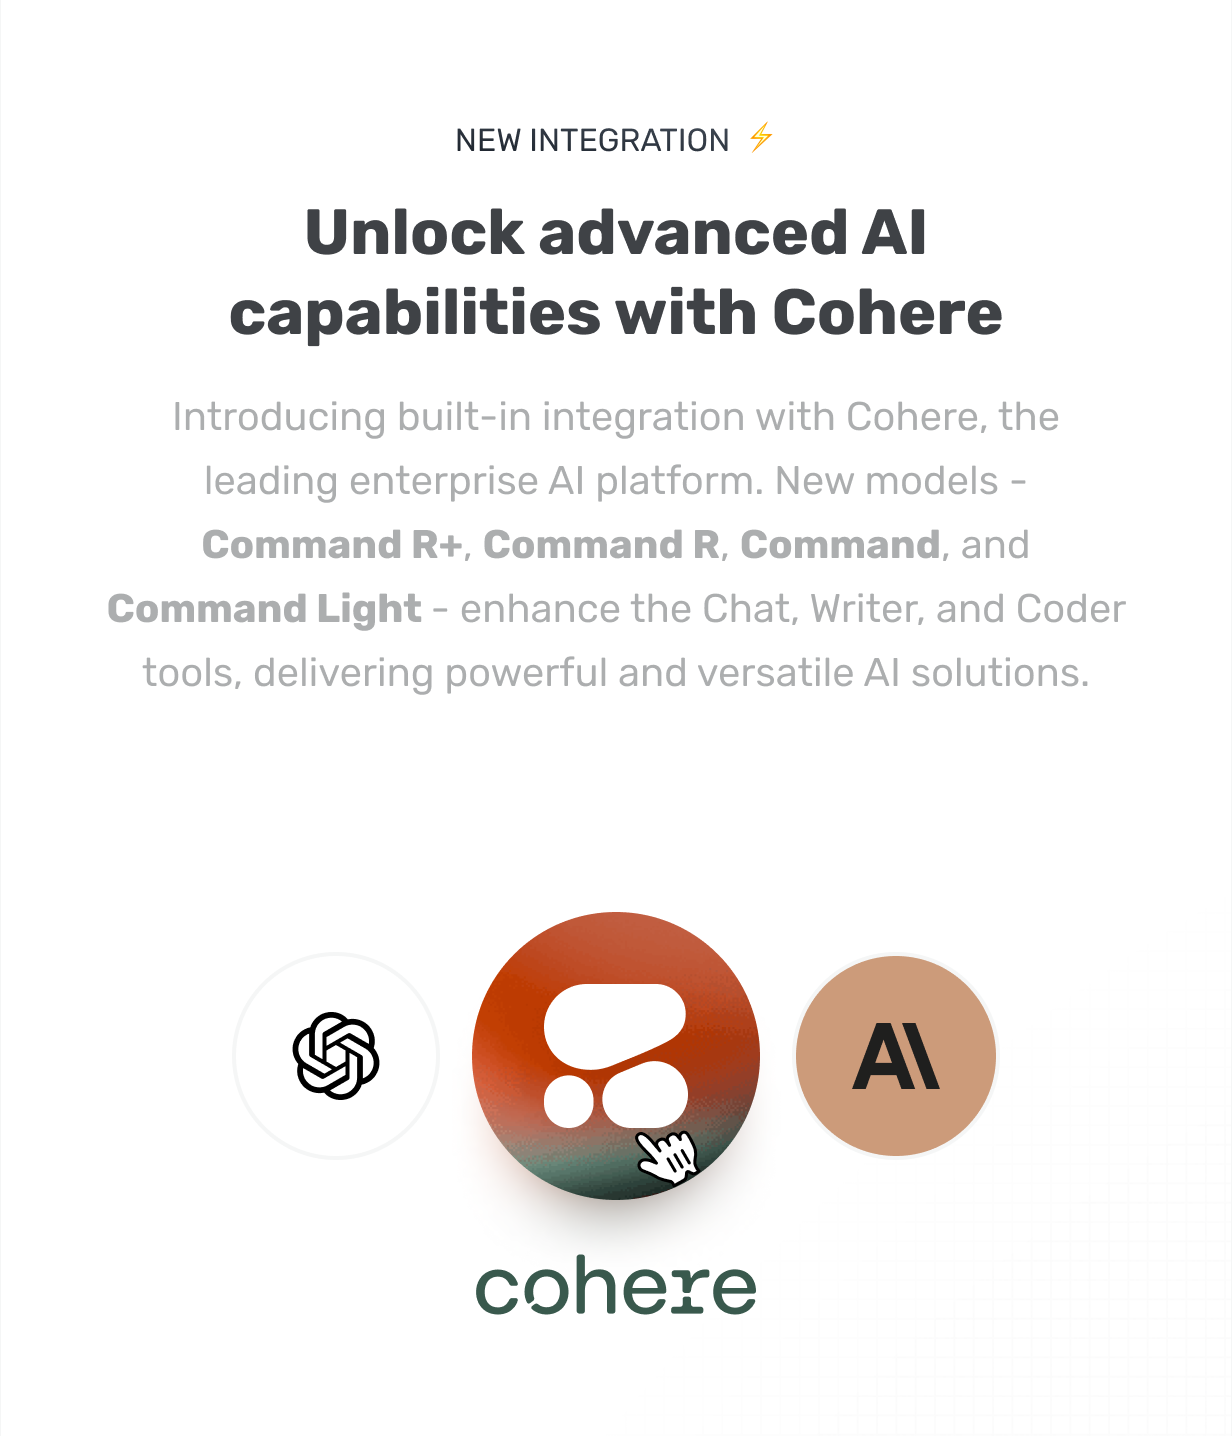 Unlock Advanced AI Capabilities with Cohere - Introducing built-in integration with Cohere, the leading enterprise AI platform. New models - Command R+, Command R, Command, and Command Light - enhance the Chat, Writer, and Coder tools, delivering powerful and versatile AI solutions. @heyaikeedo #aikeedo